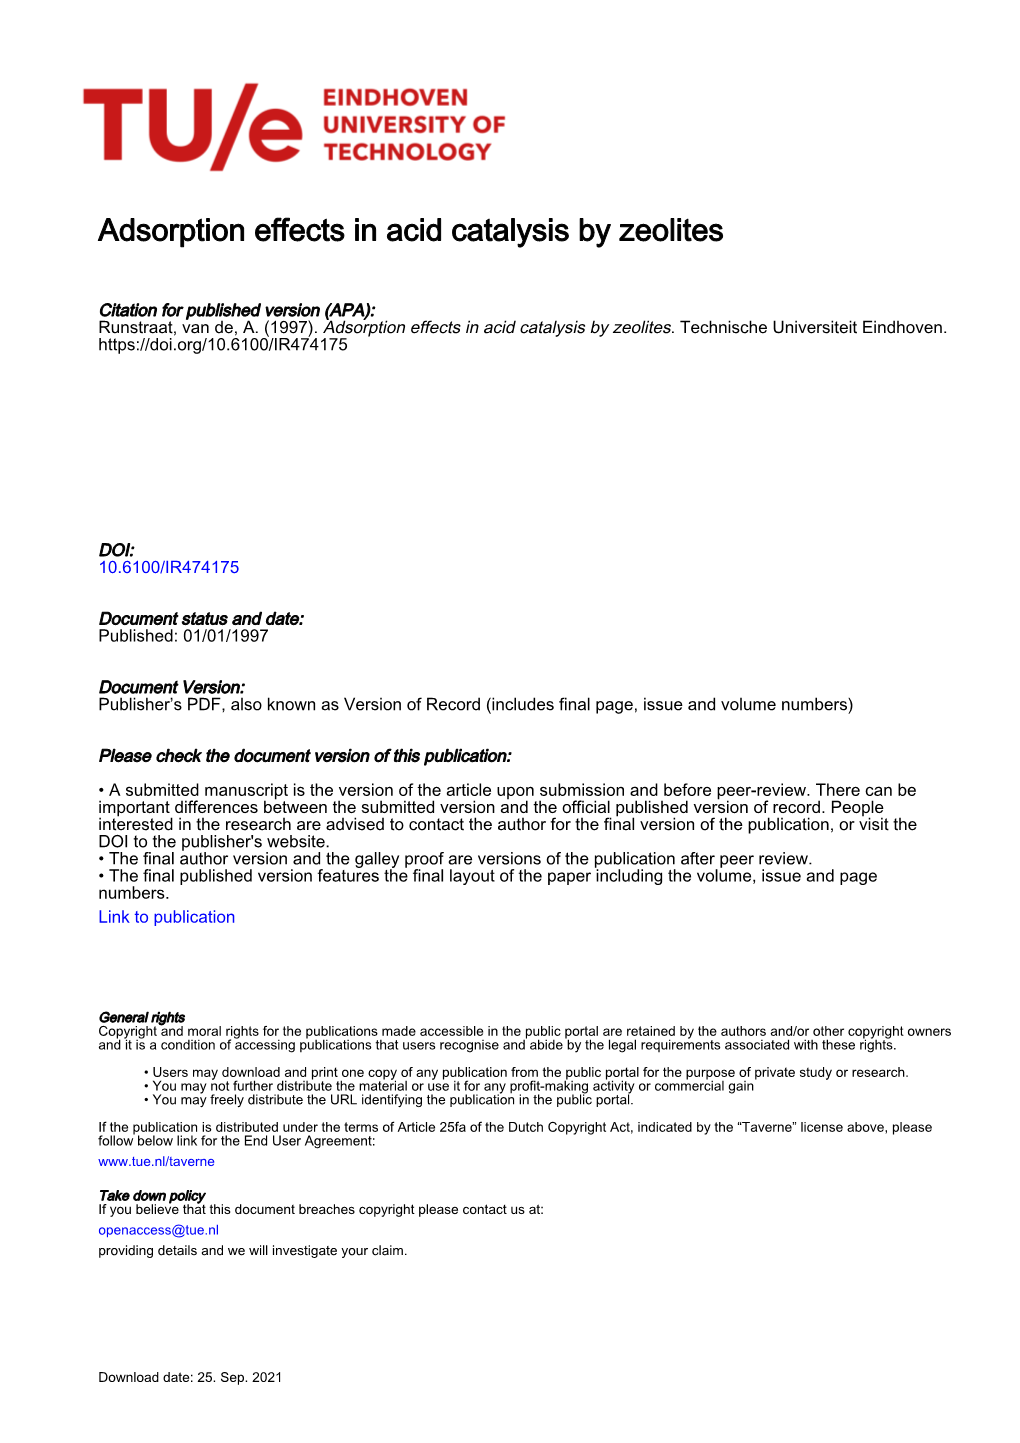 Adsorption Effects in Acid Catalysis by Zeolites